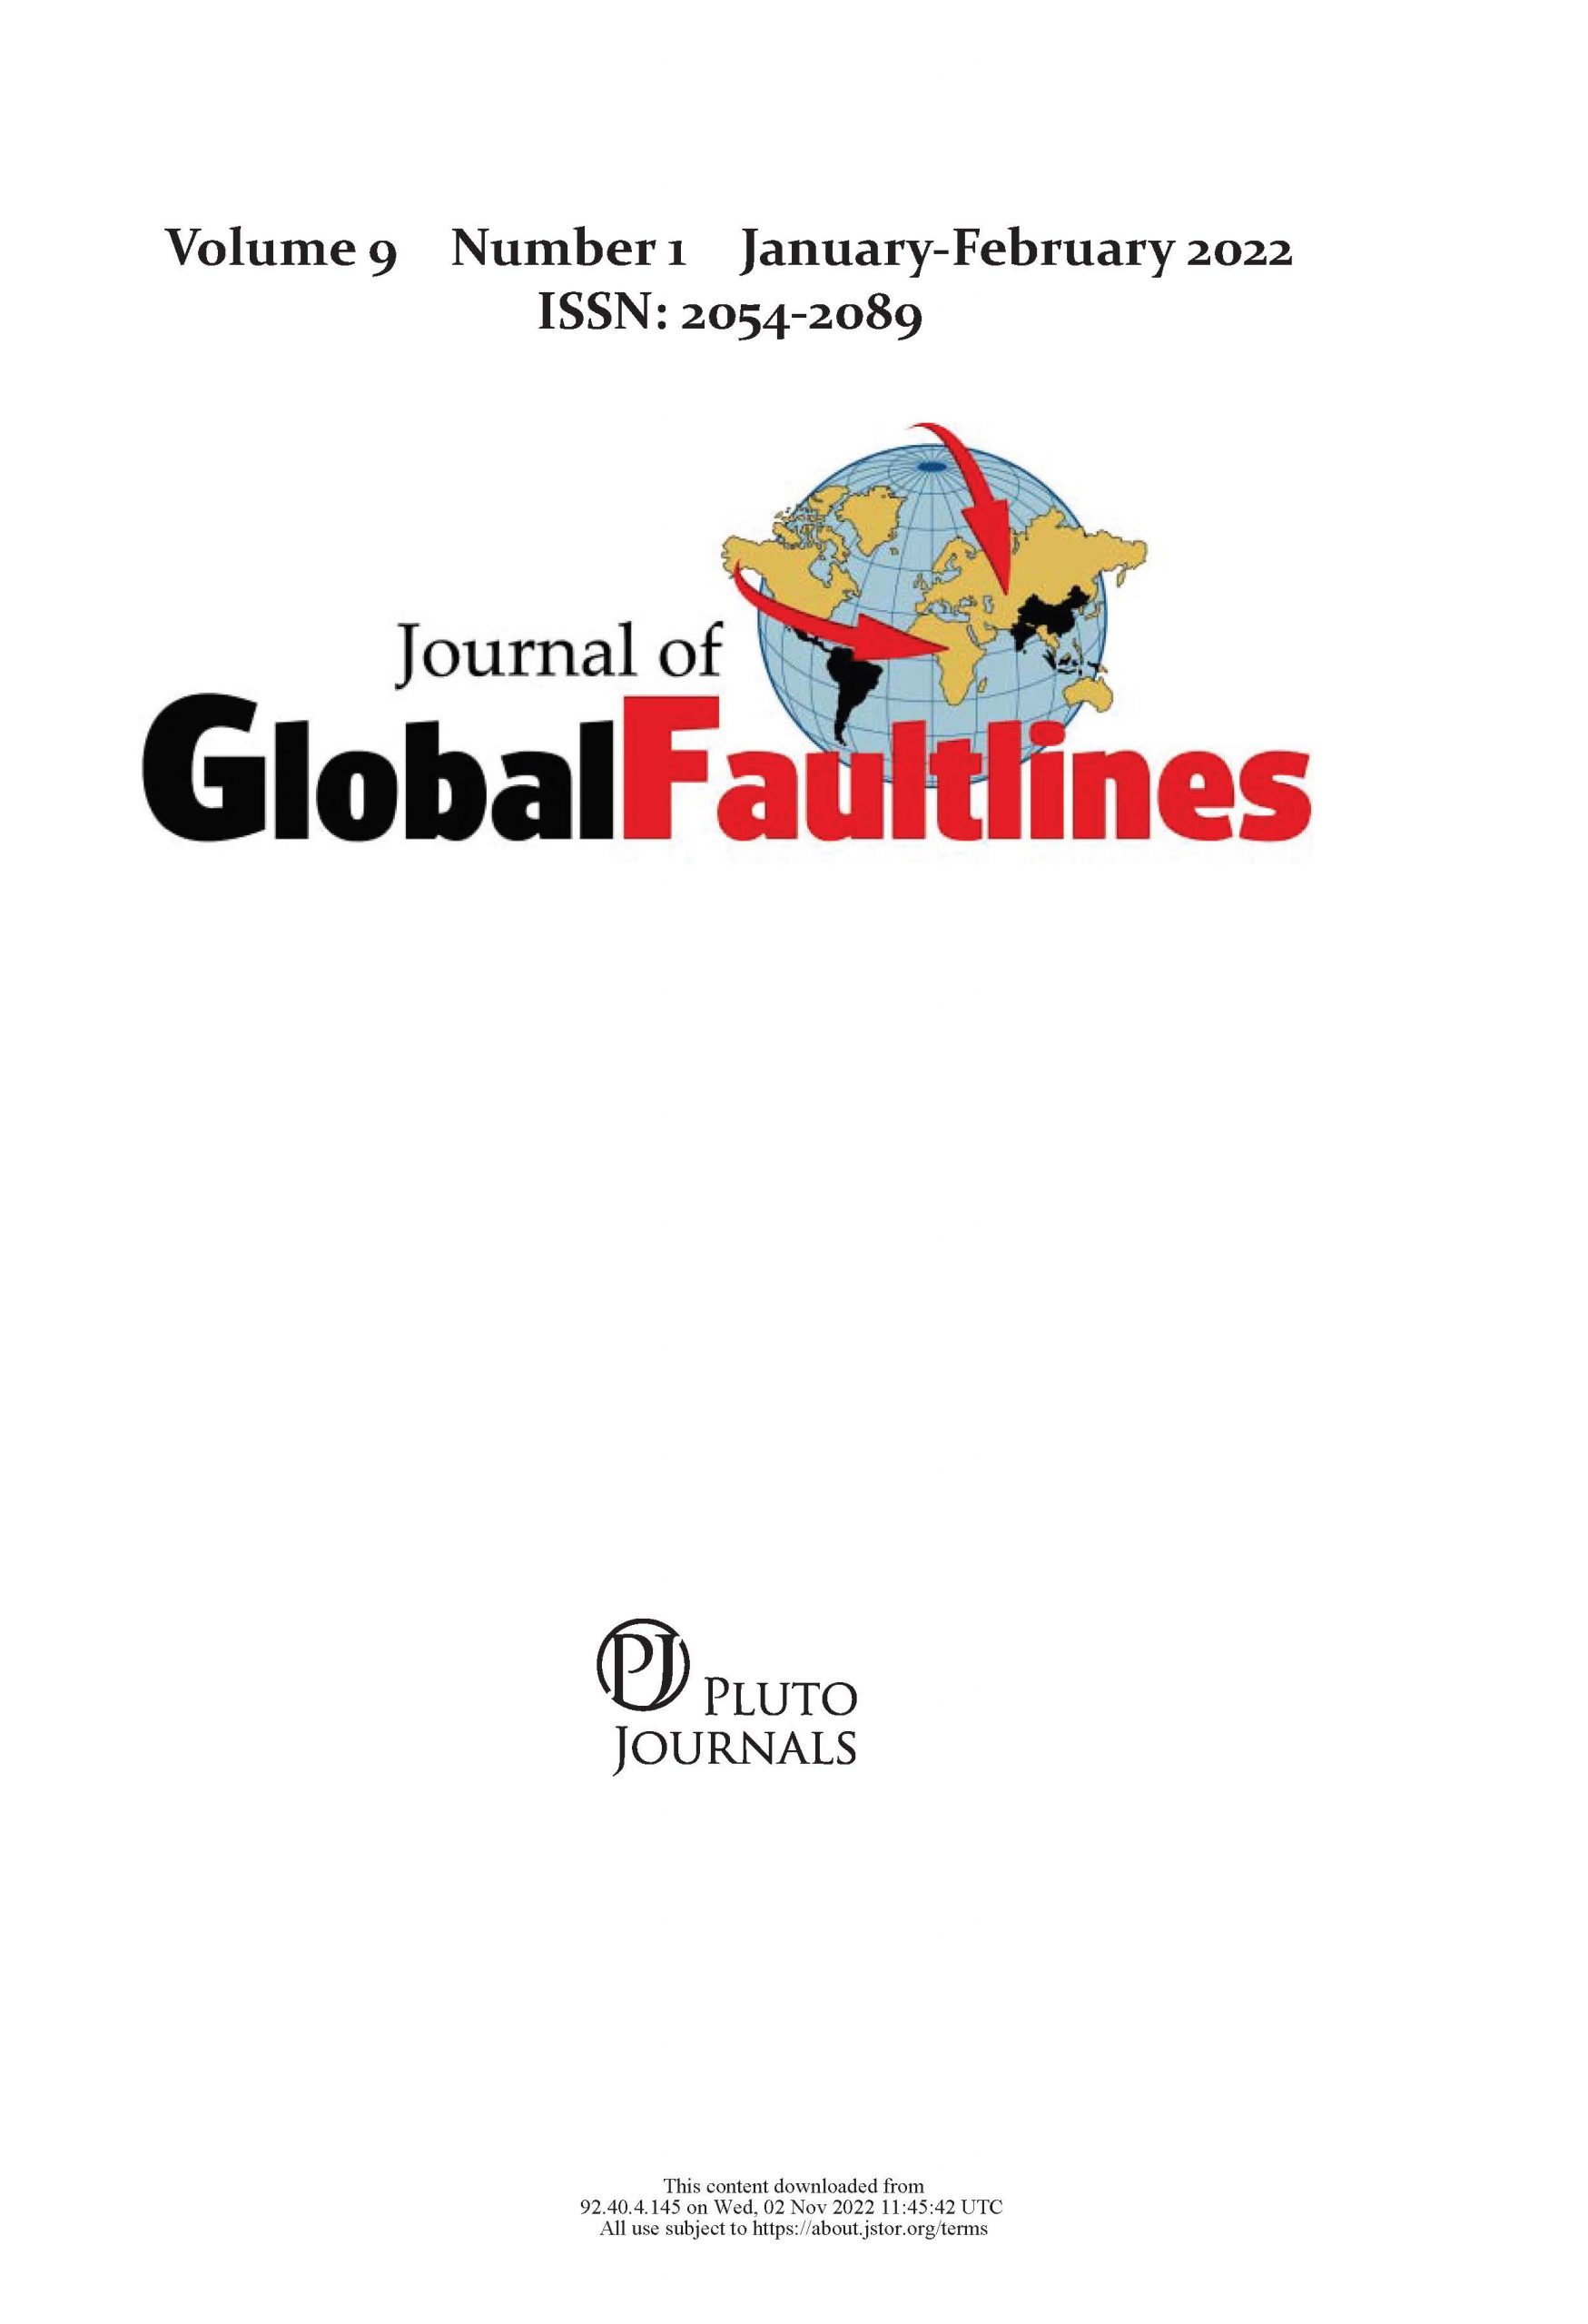 Journal of Global Faultlines Front Cover